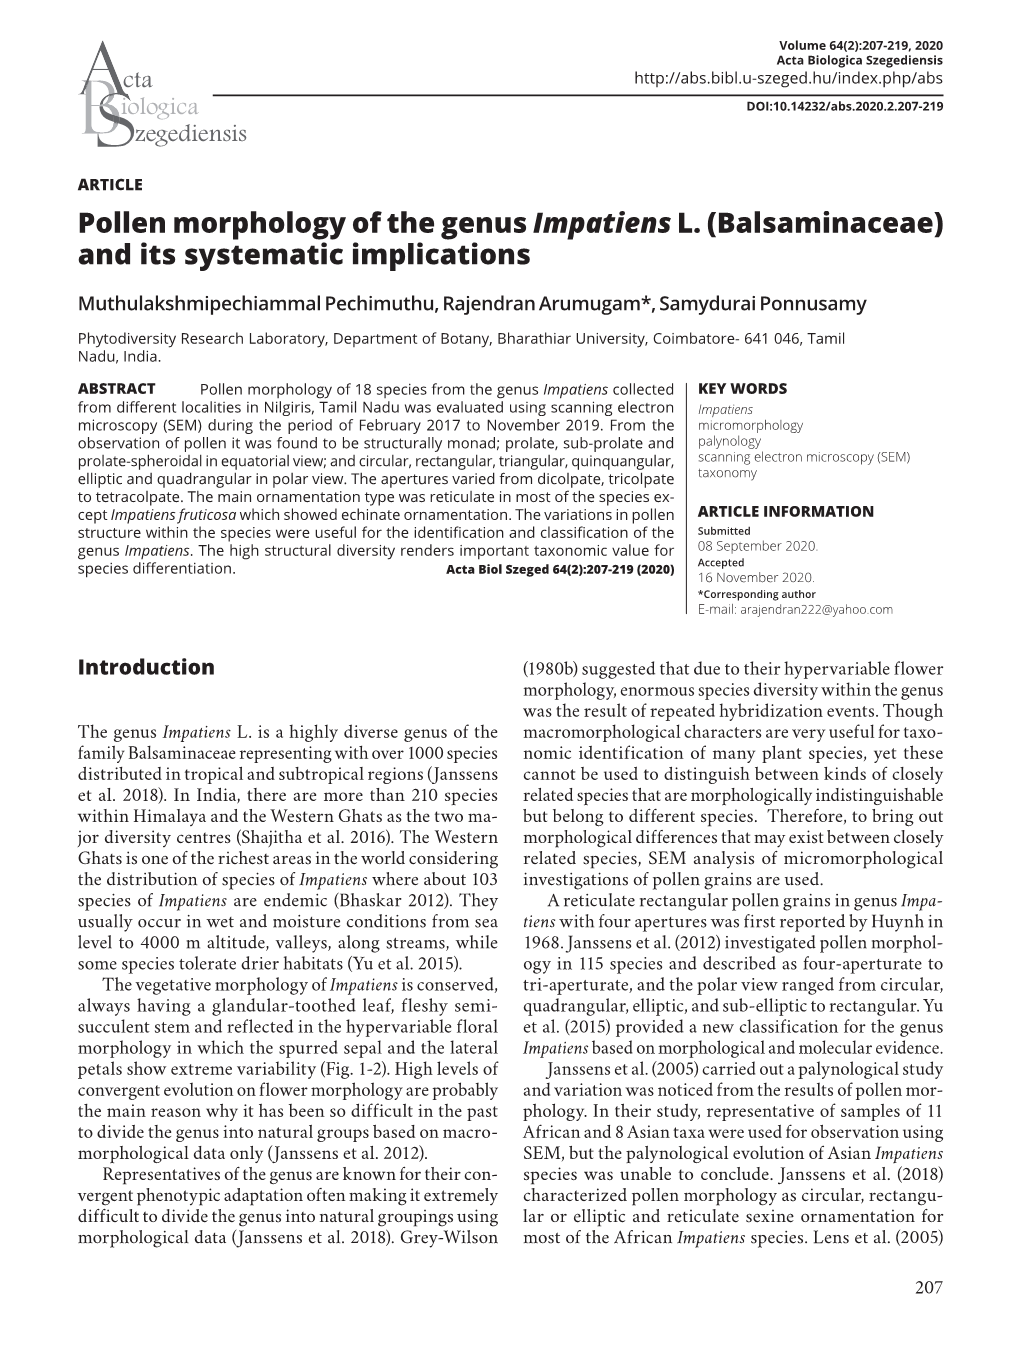 Pollen Morphology of the Genus Impatiens L. (Balsaminaceae) and Its Systematic Implications